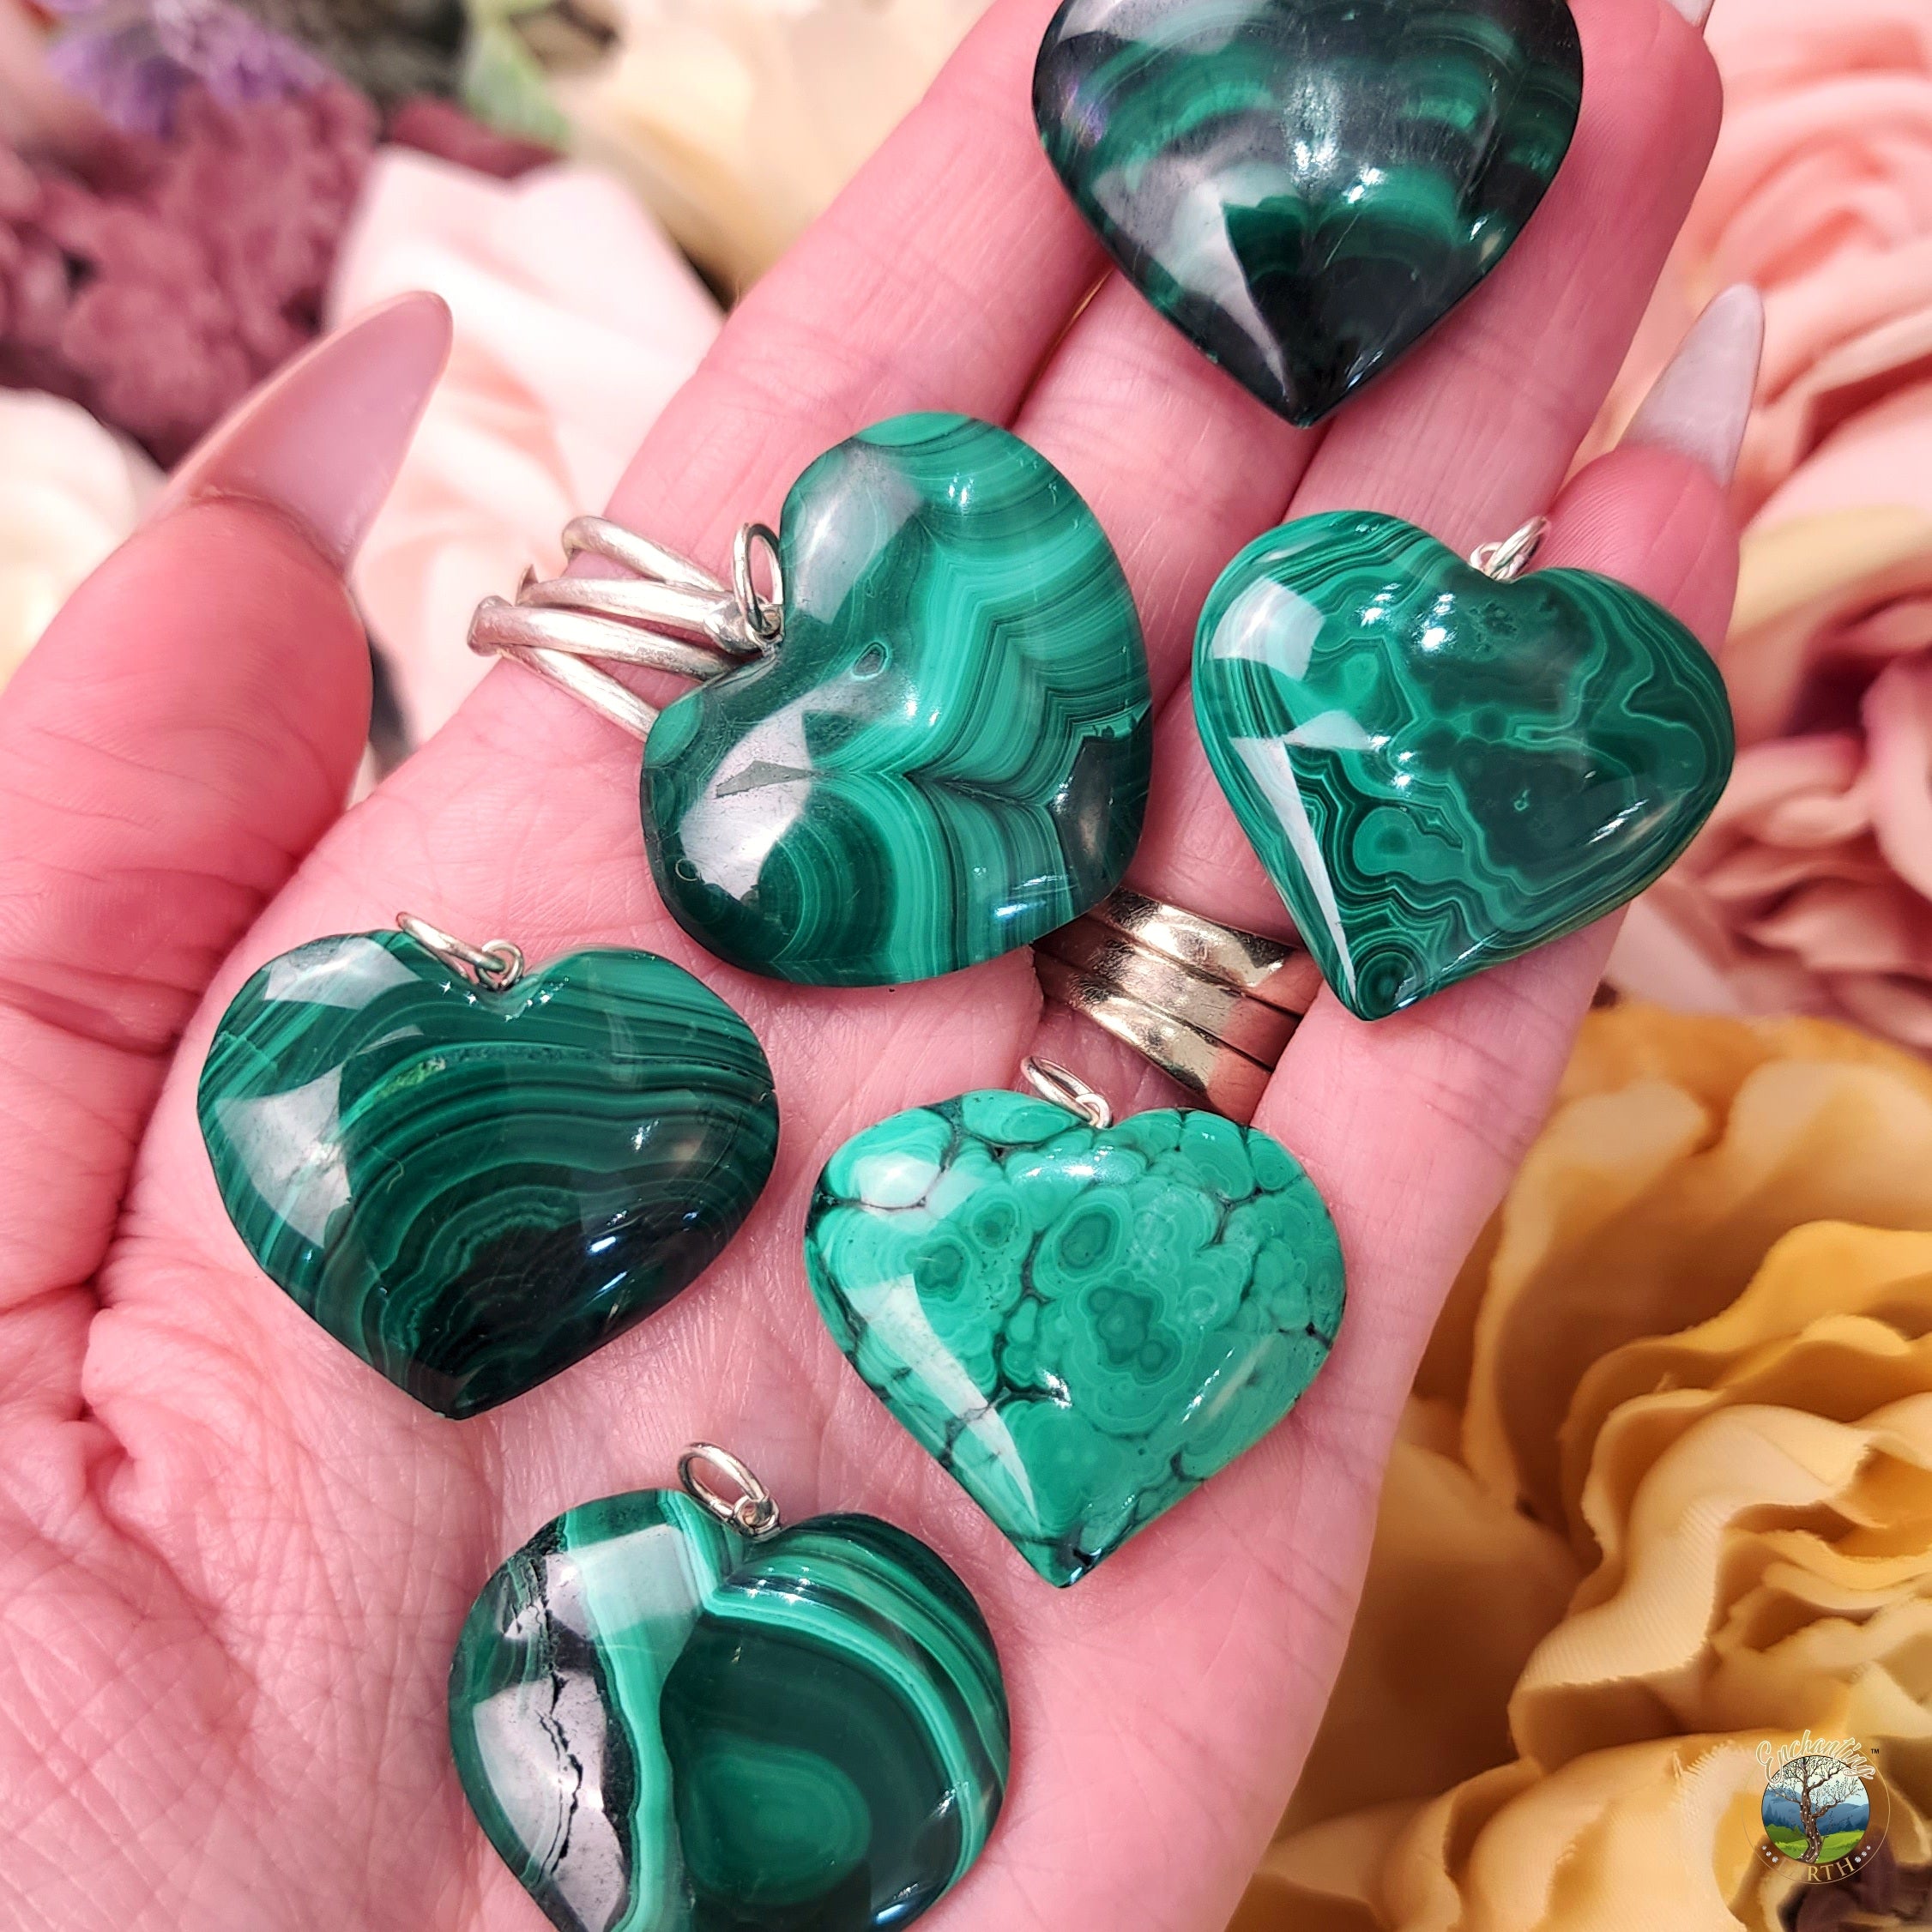 Malachite Heart Pendant for Heart Healing and Transformation